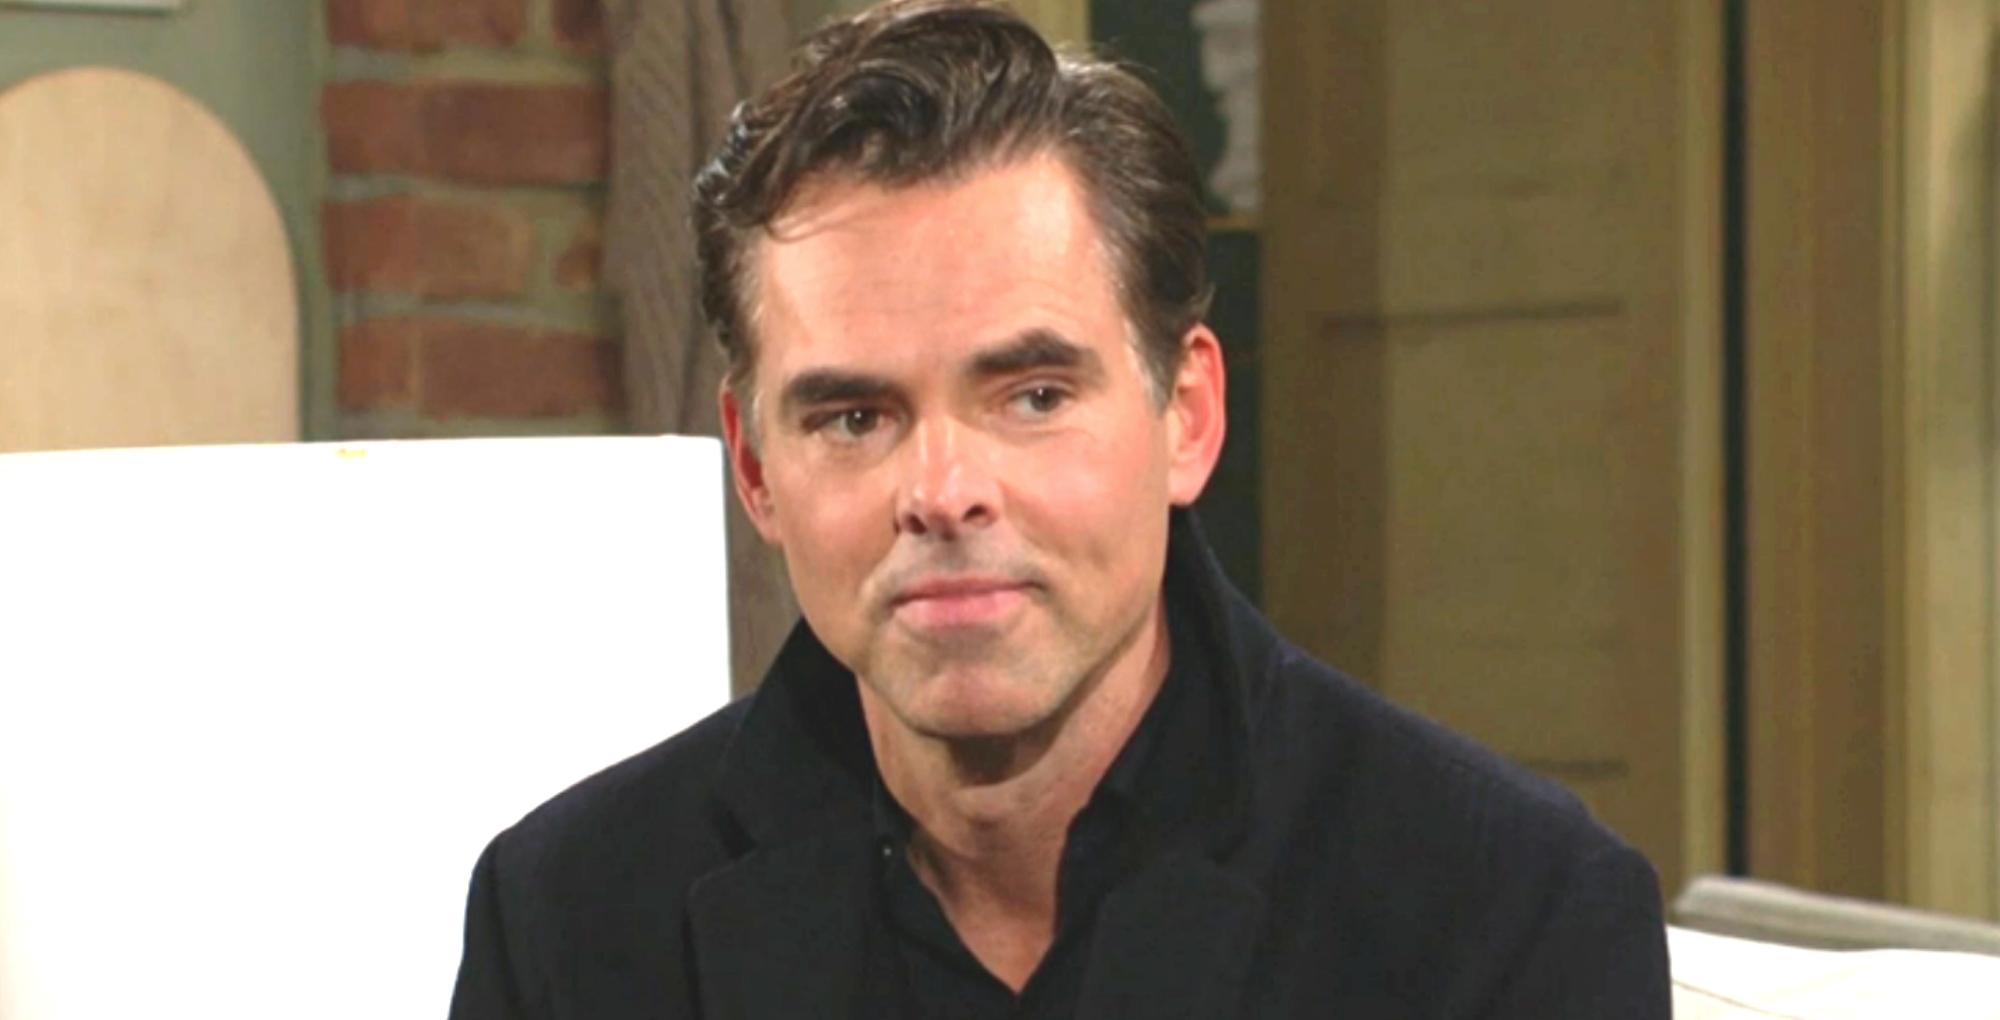 the young and the restless spoilers for may 1, 2023, have smiling billy ready to do damage control.